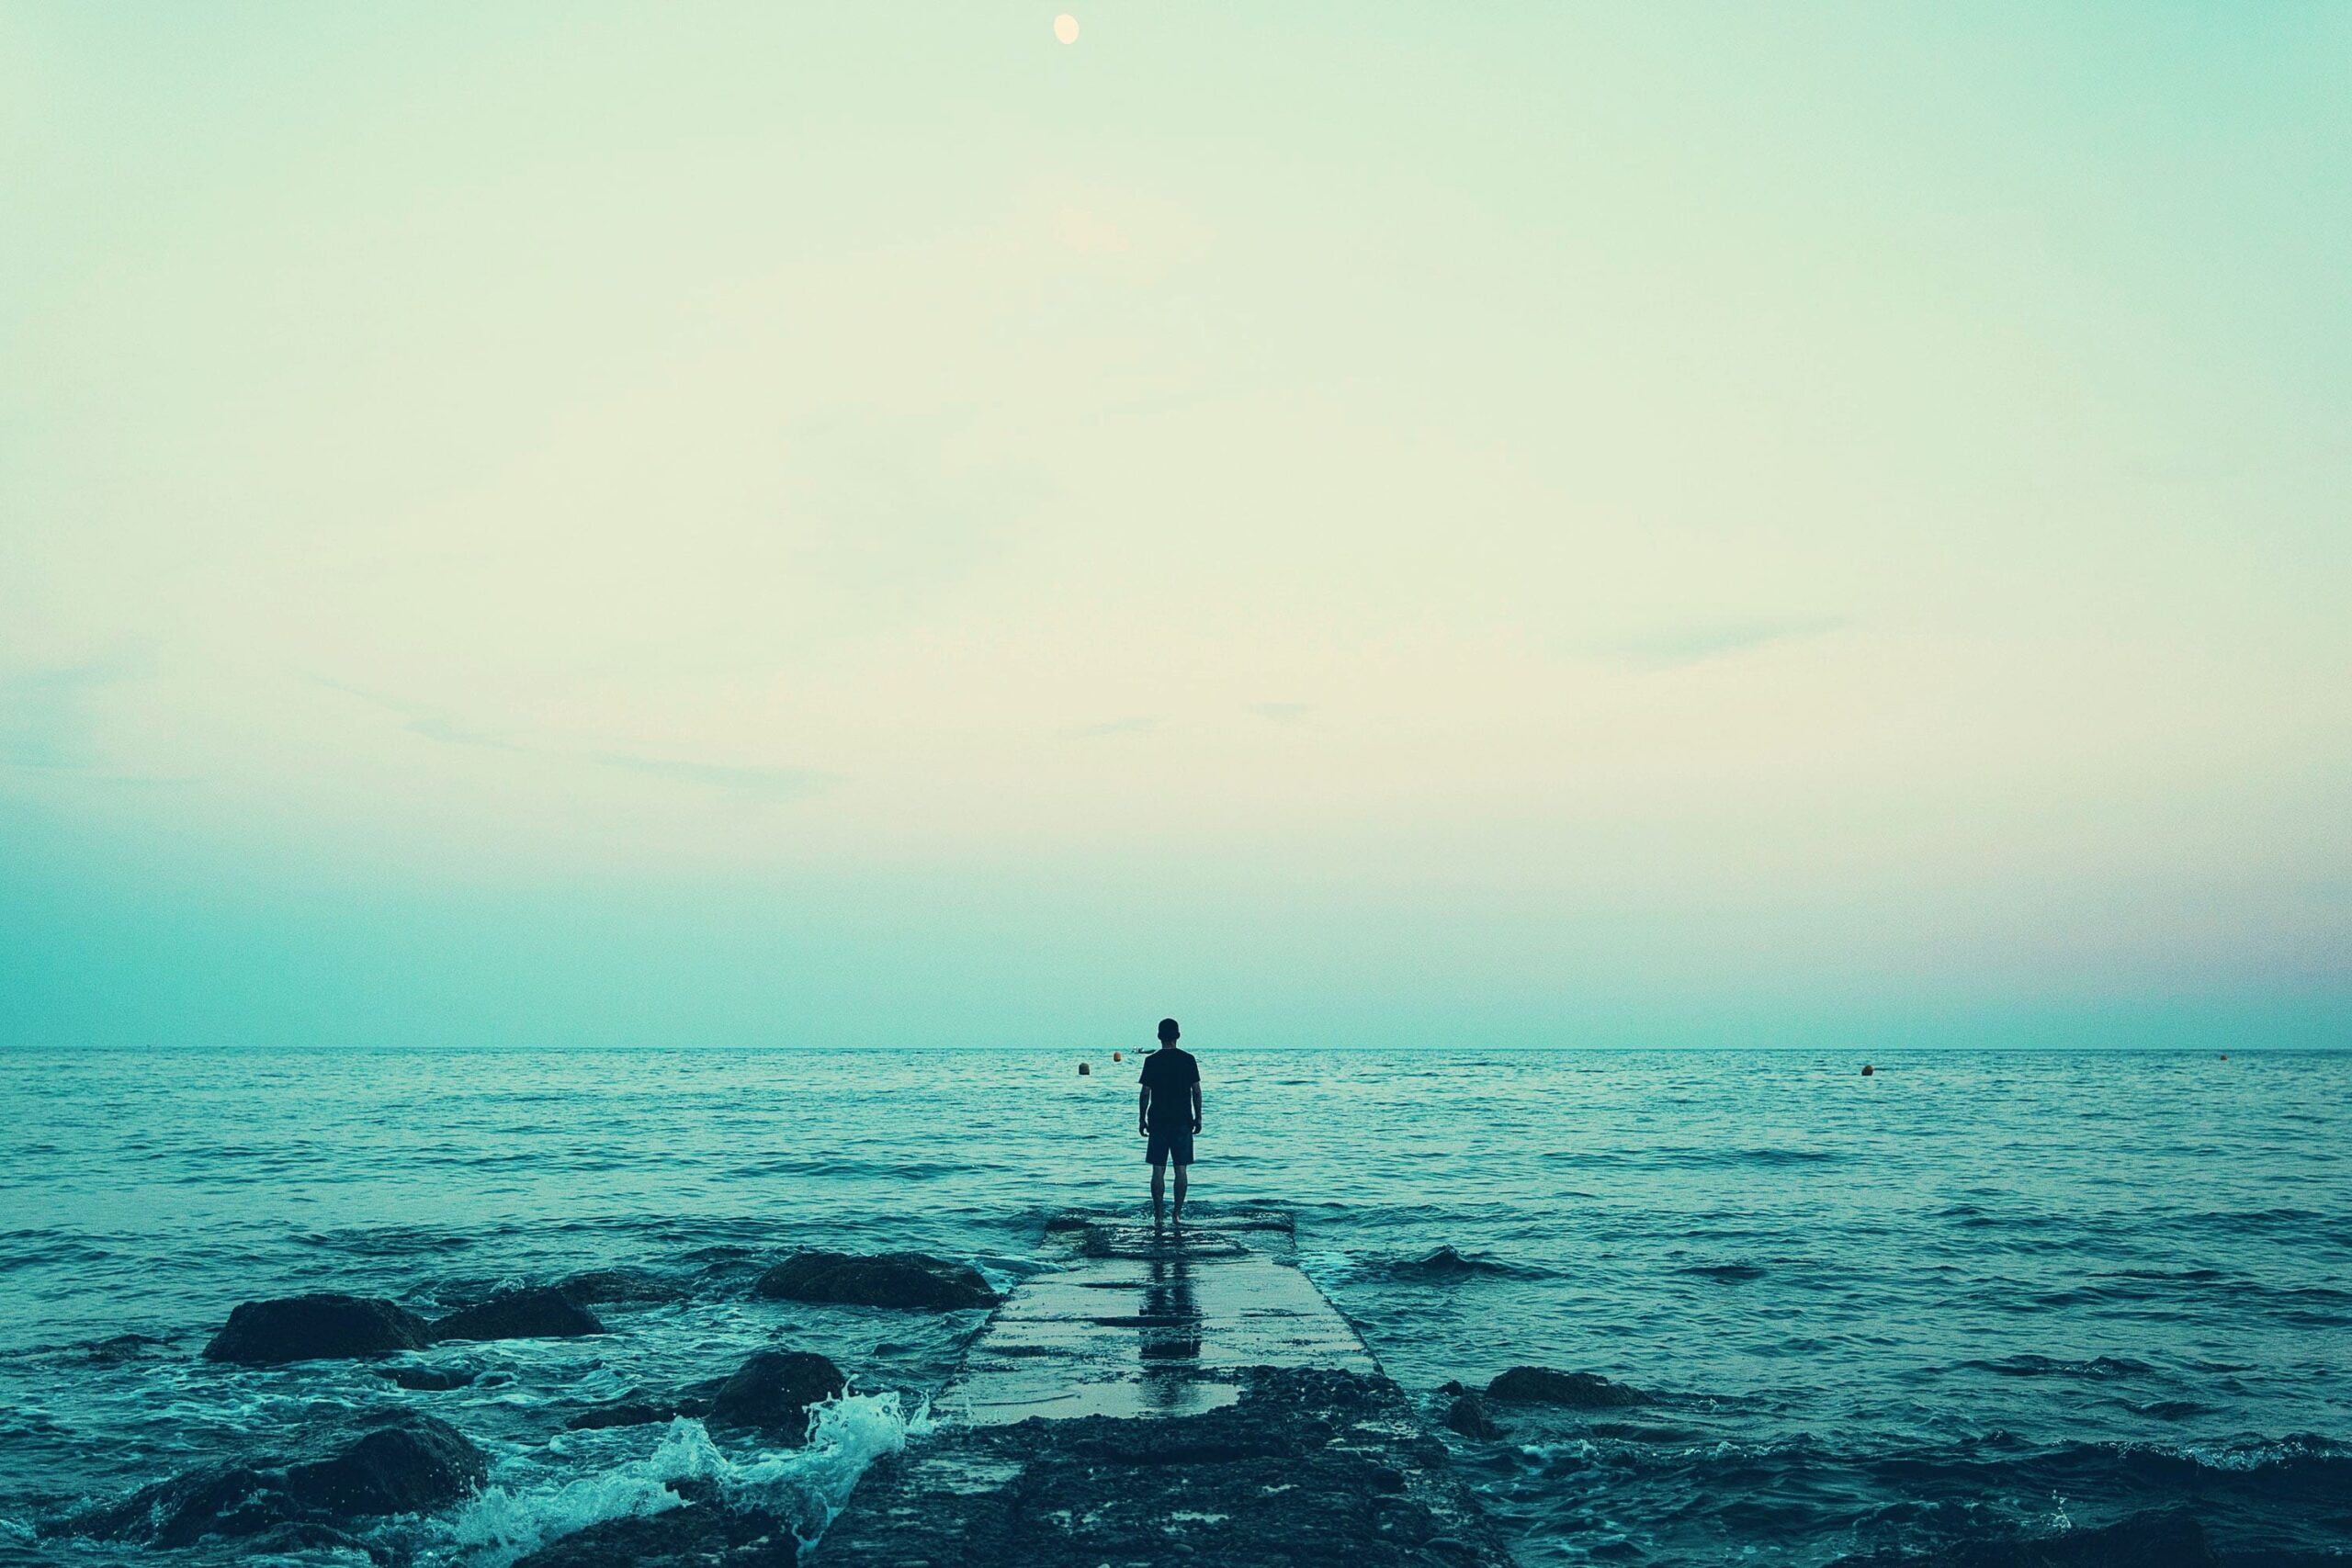 lone person looking out onto a vast sea